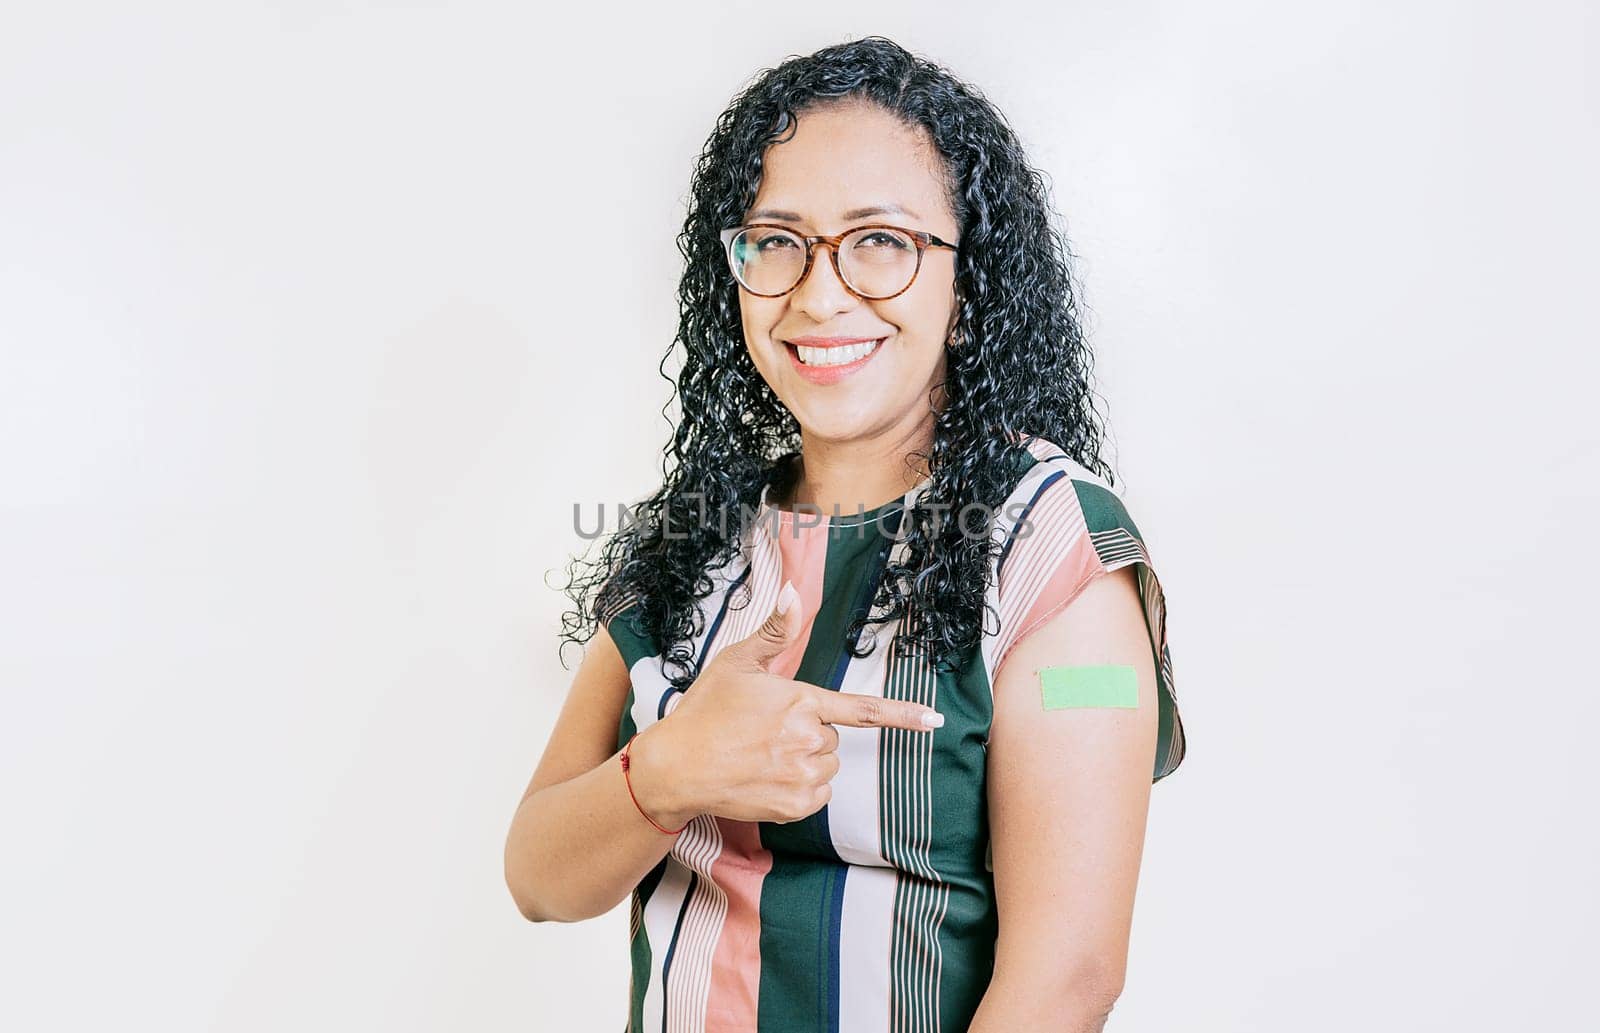 Latin woman pointing at the bandage on her vaccinated arm isolated. Smiling woman pointing at her vaccinated arm by isaiphoto